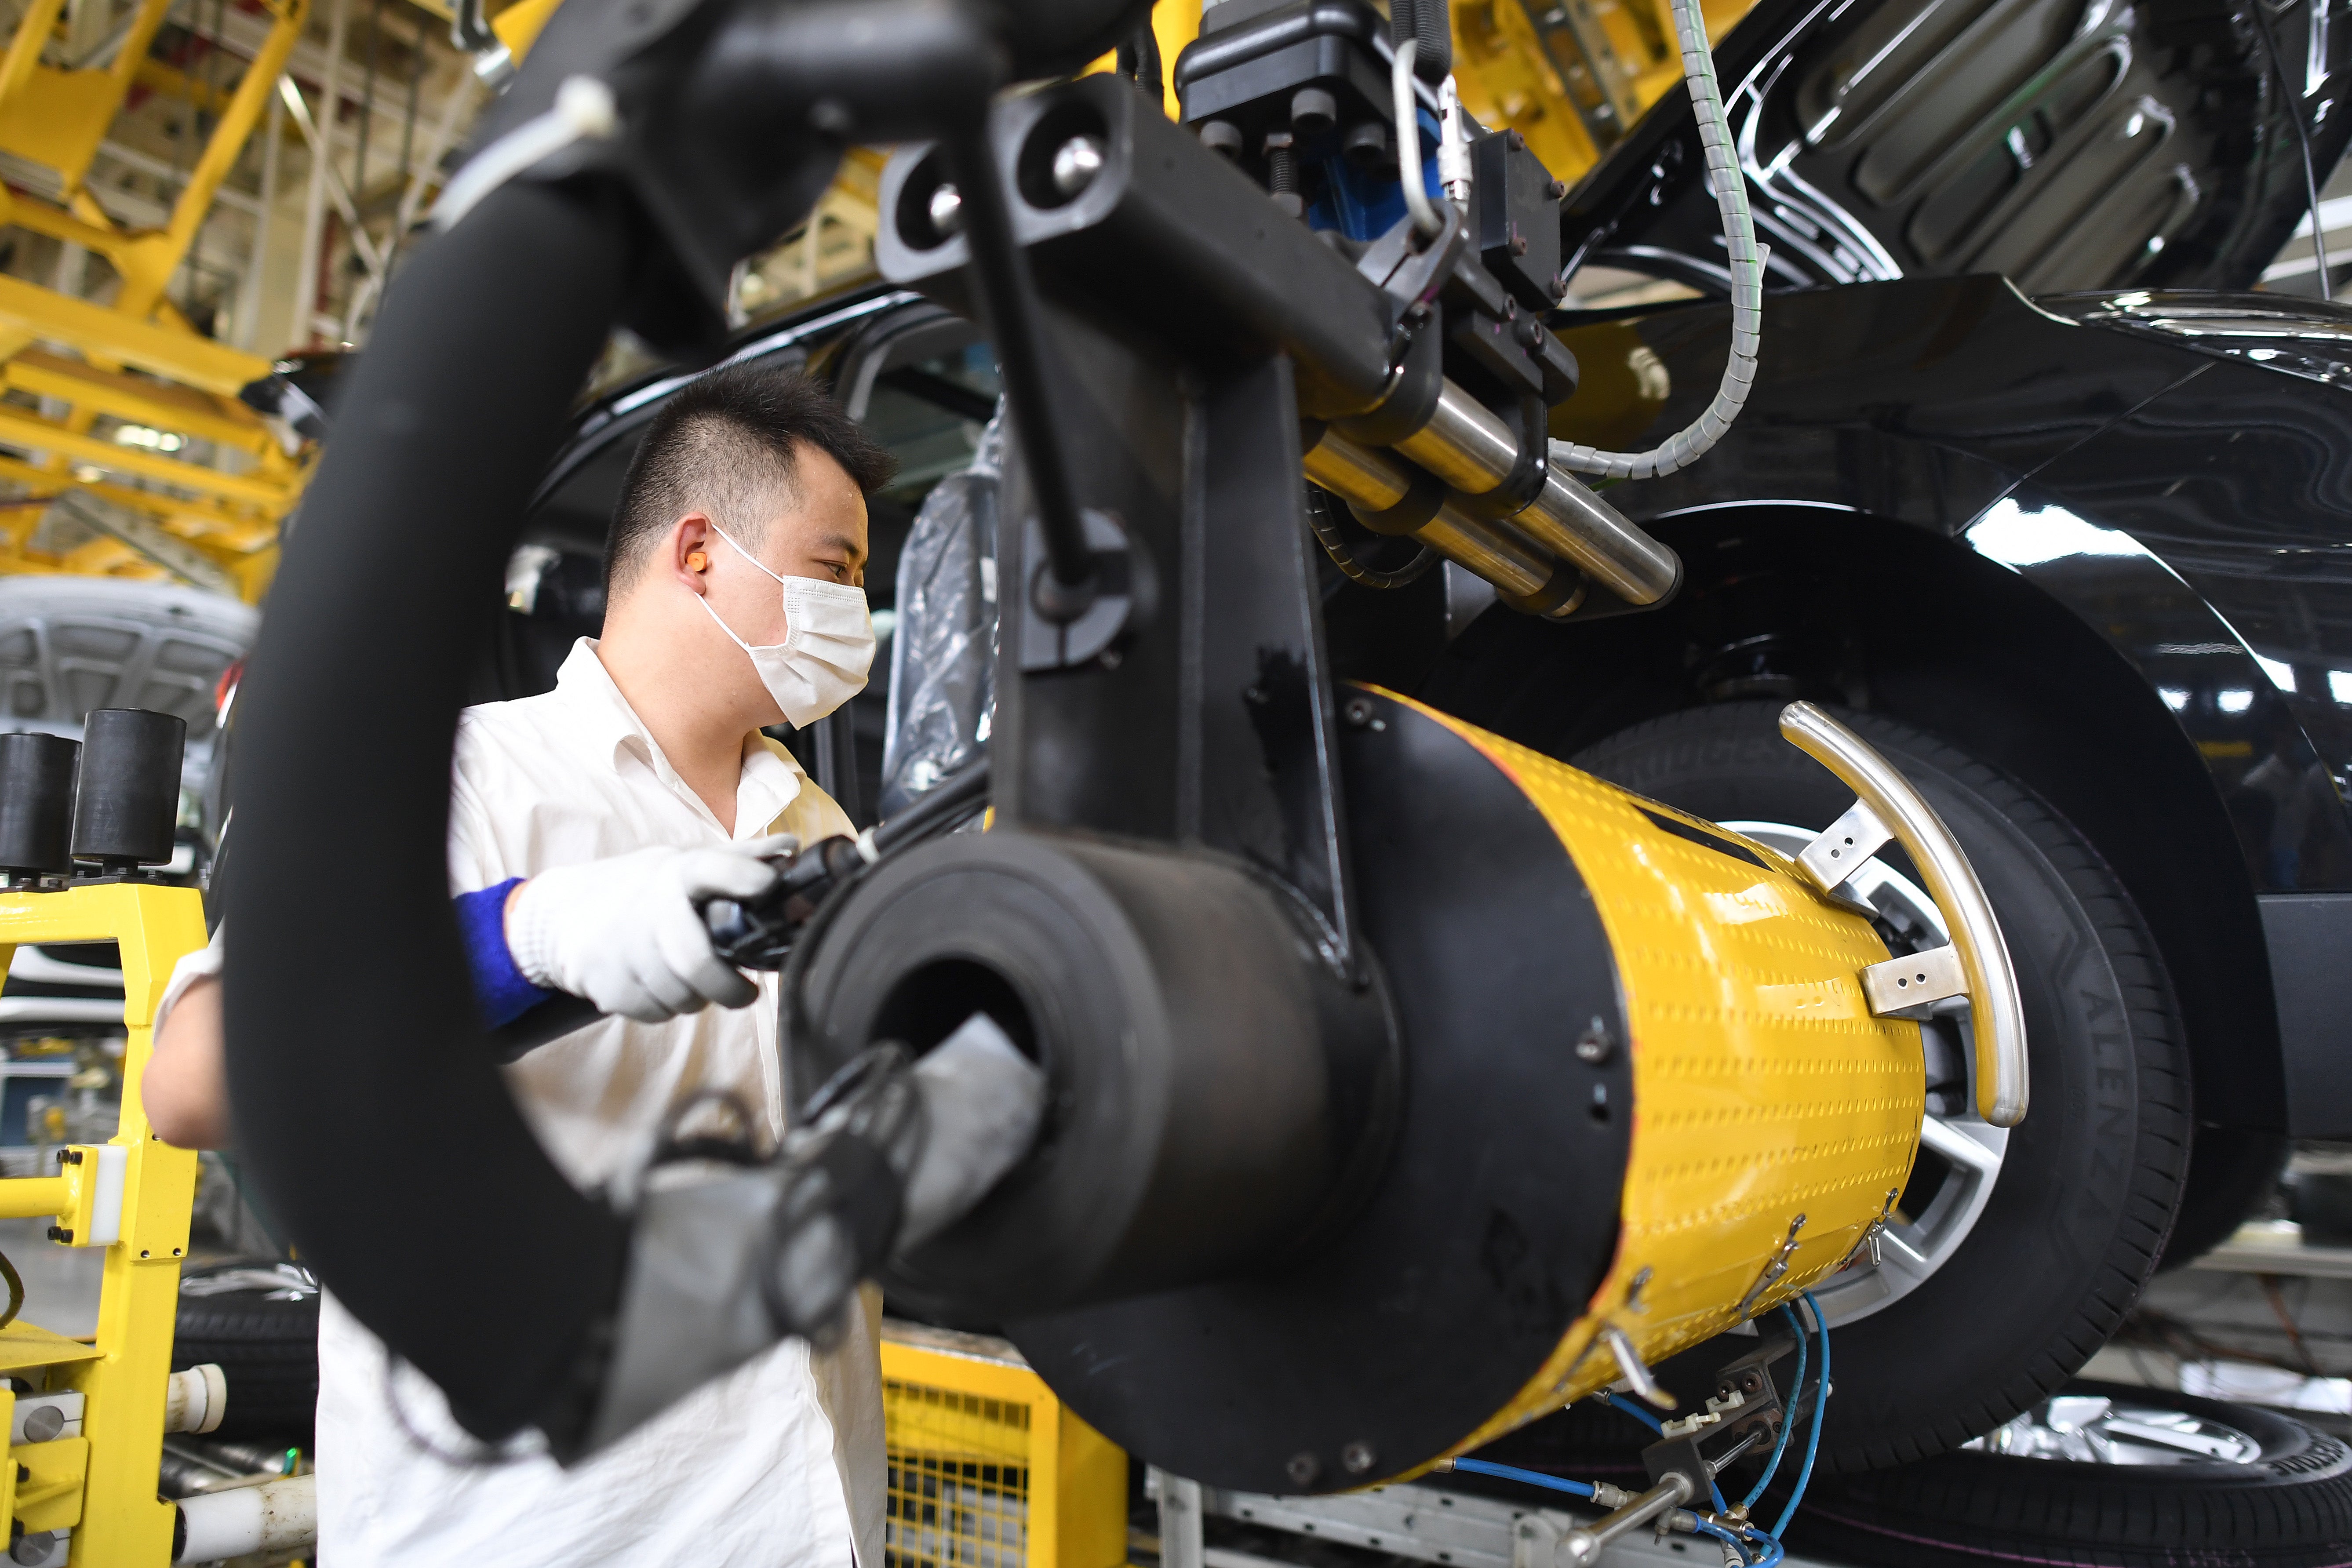 An employee works on the production line of an automobile joint venture in Wuhan, Hubei province